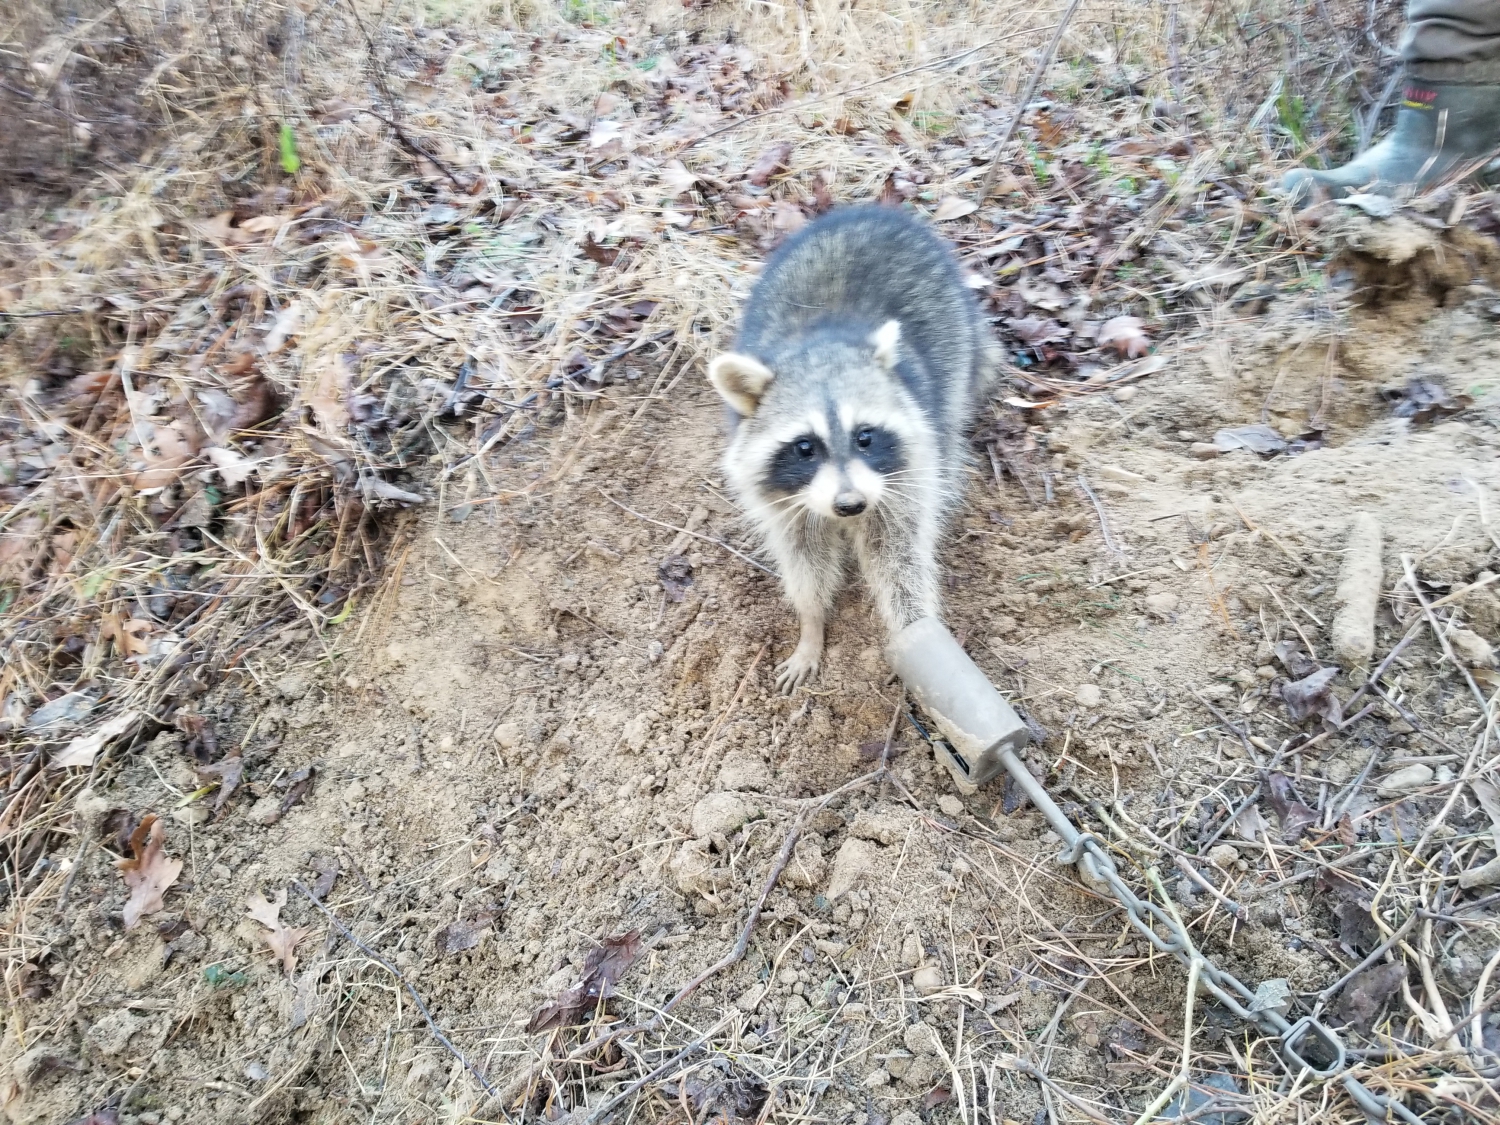 Dog-Proof Traps Make Raccoon Trapping Simple – Georgia Outdoor News